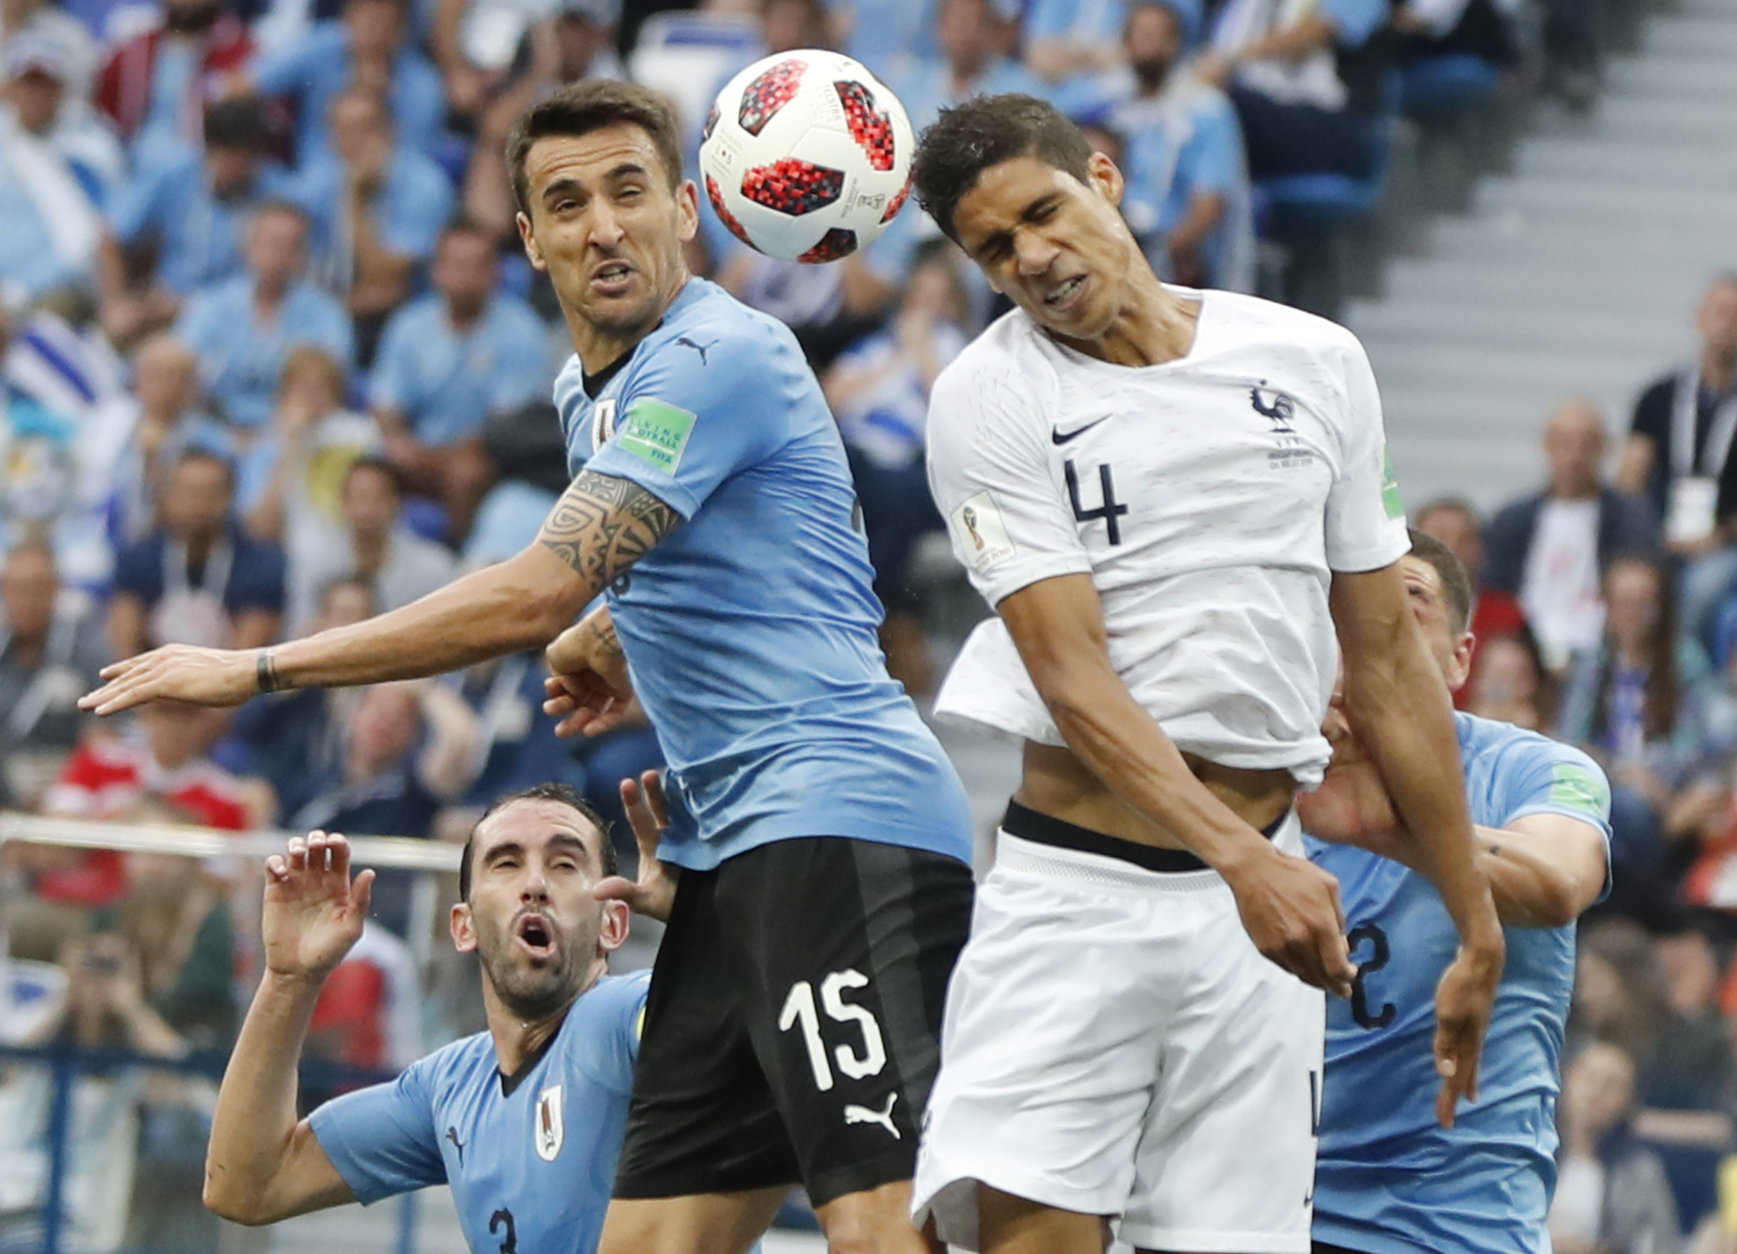 France's Raphael Varane, center right, and Uruguay's Matias Vecino, center left, challenge for the ball during the quarterfinal match between Uruguay and France at the 2018 soccer World Cup in the Nizhny Novgorod Stadium, in Nizhny Novgorod, Russia, Friday, July 6, 2018. (AP Photo/Petr David Josek)